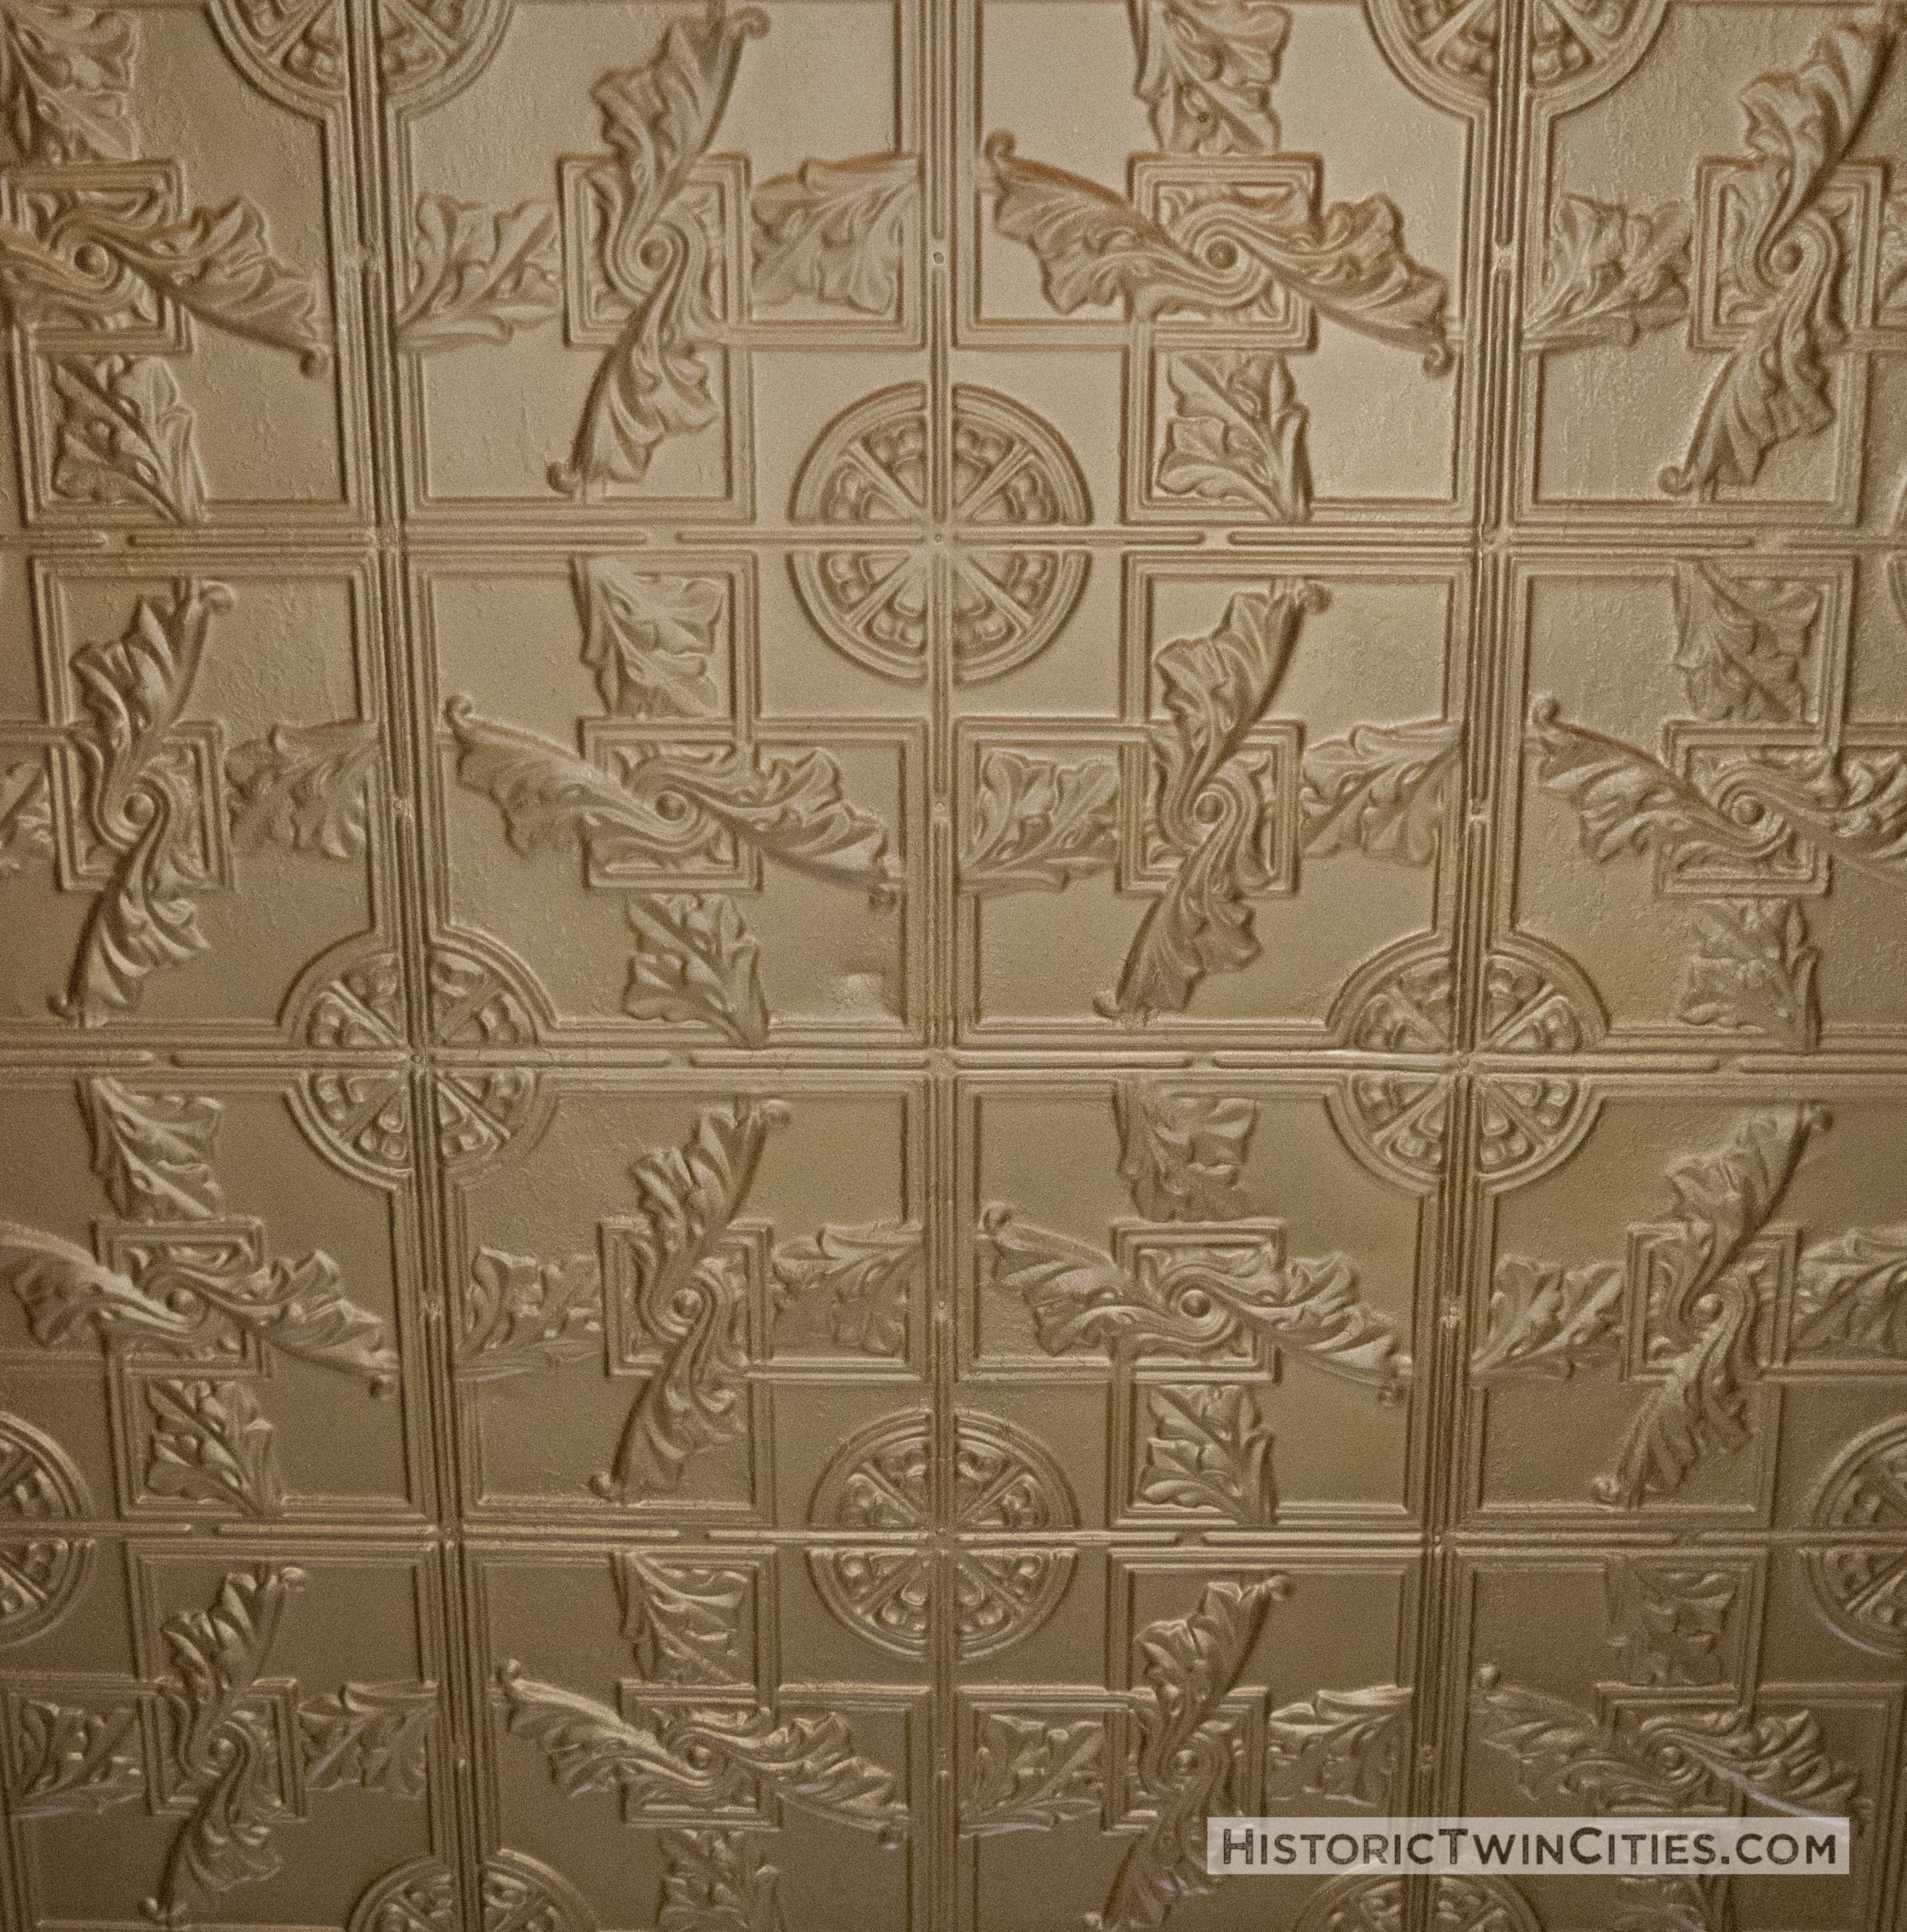 Stamped galvanized iron ceiling tiles inside the Stockyards Exchange Building - South St. Paul